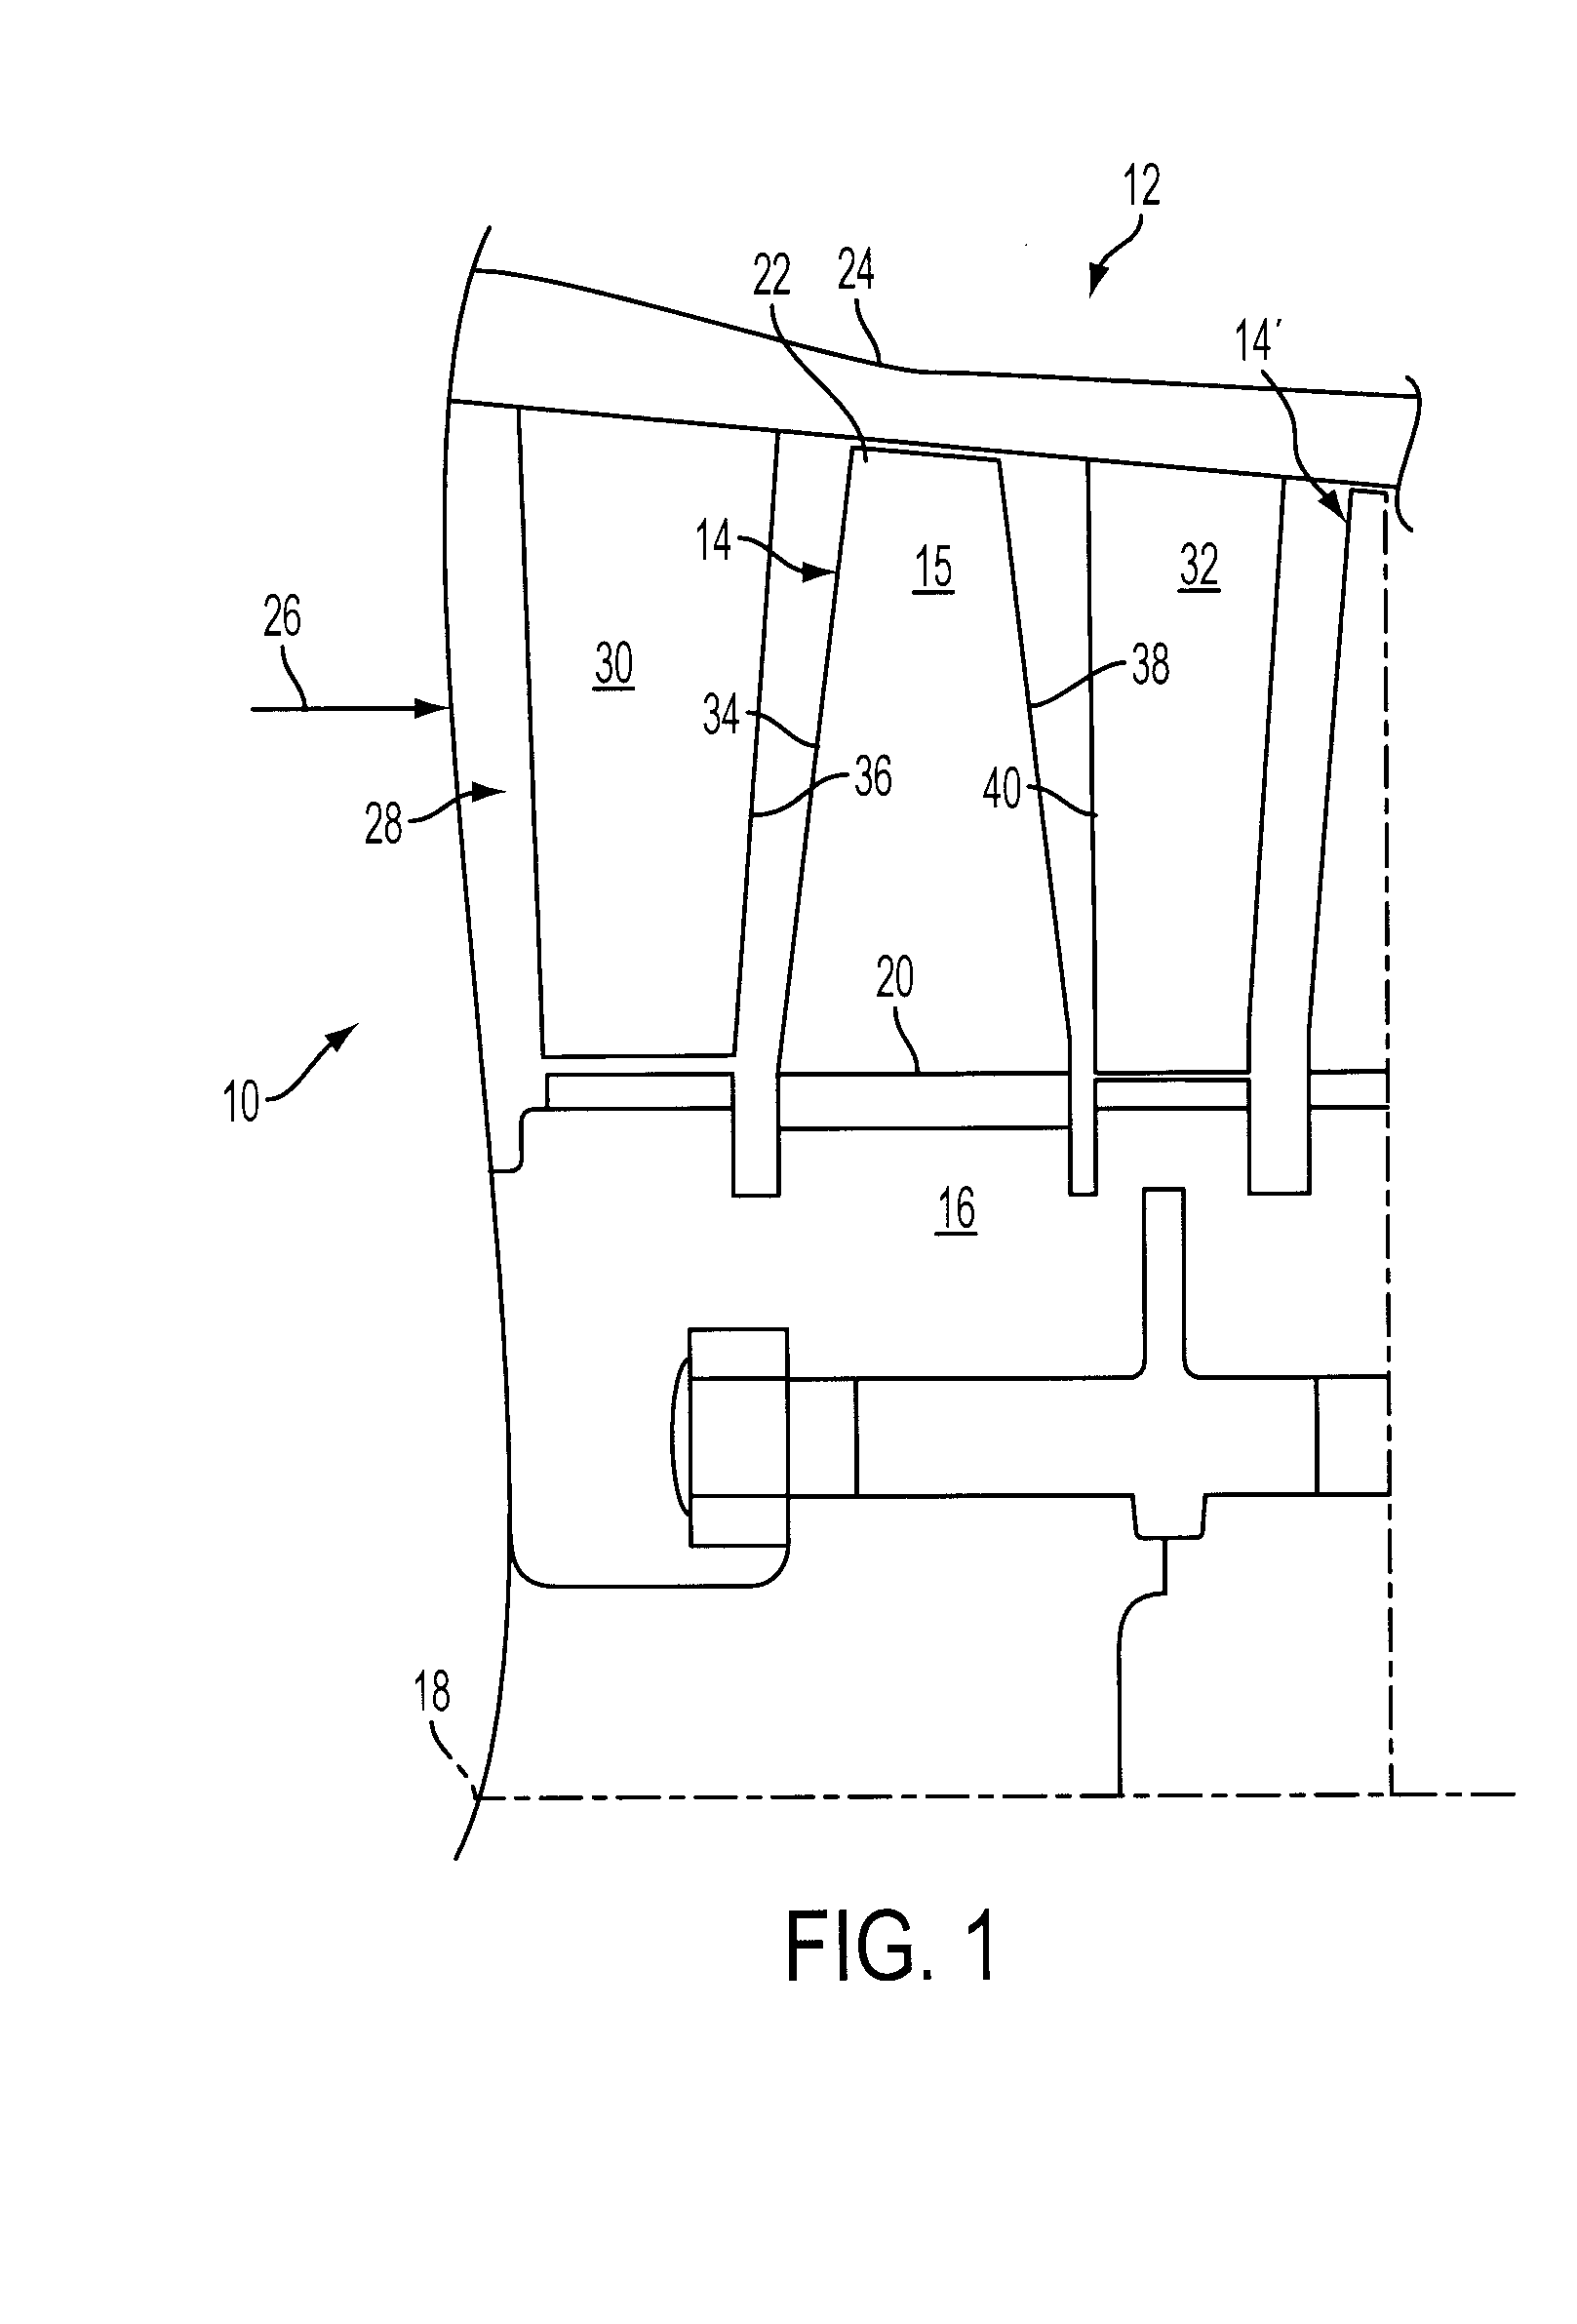 Compressor blade with forward sweep and dihedral